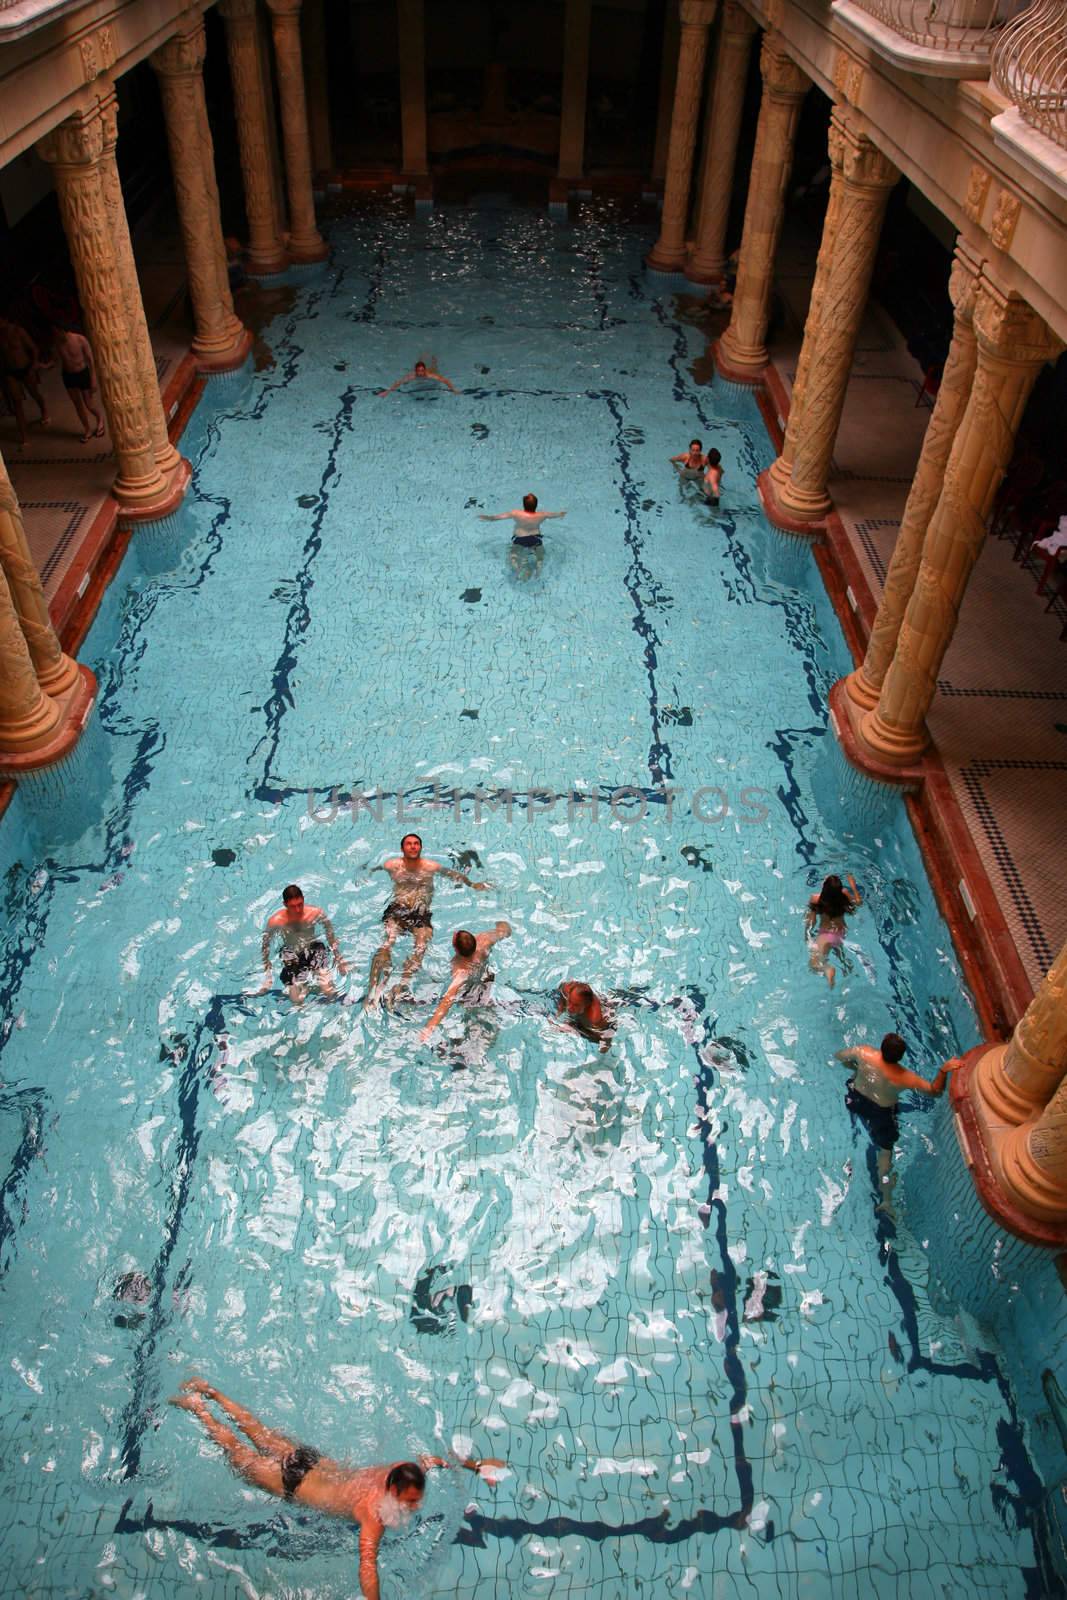 Main swimming pool of the Széchenyi Thermal Bath in Budapest City Park.